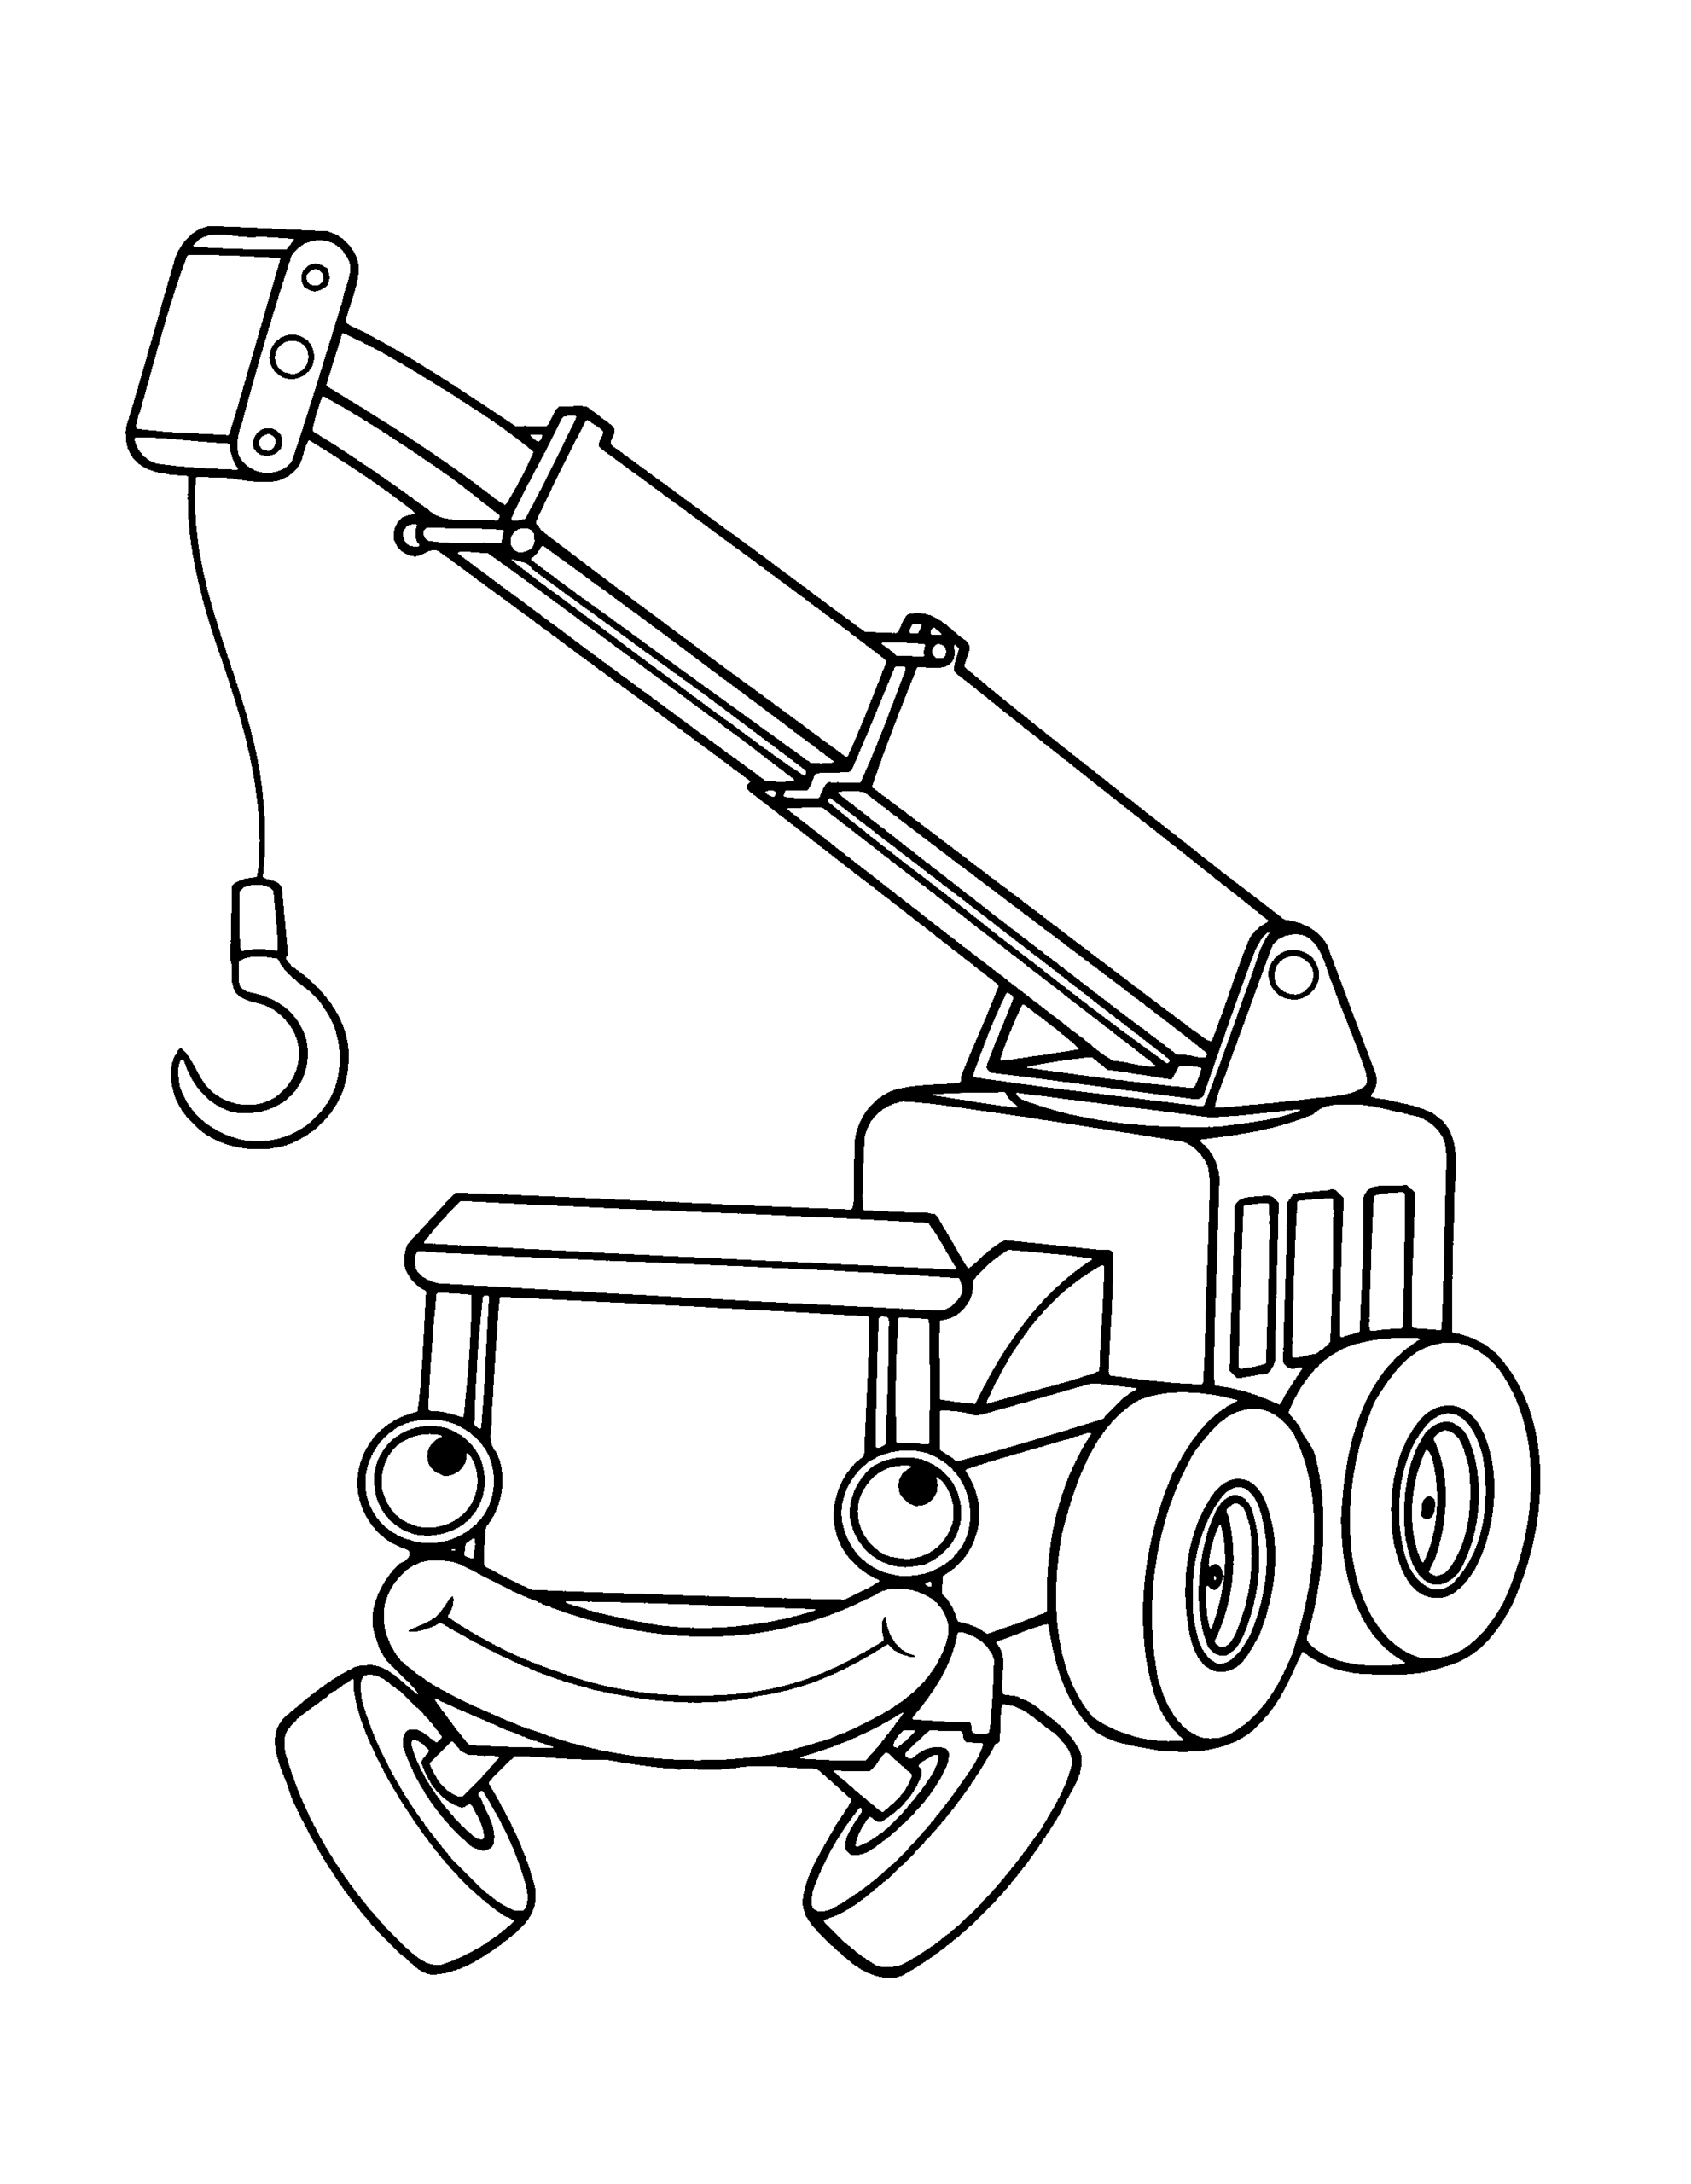 Bob the Builder Coloring Pages TV Film bob the builder 86 Printable 2020 01104 Coloring4free